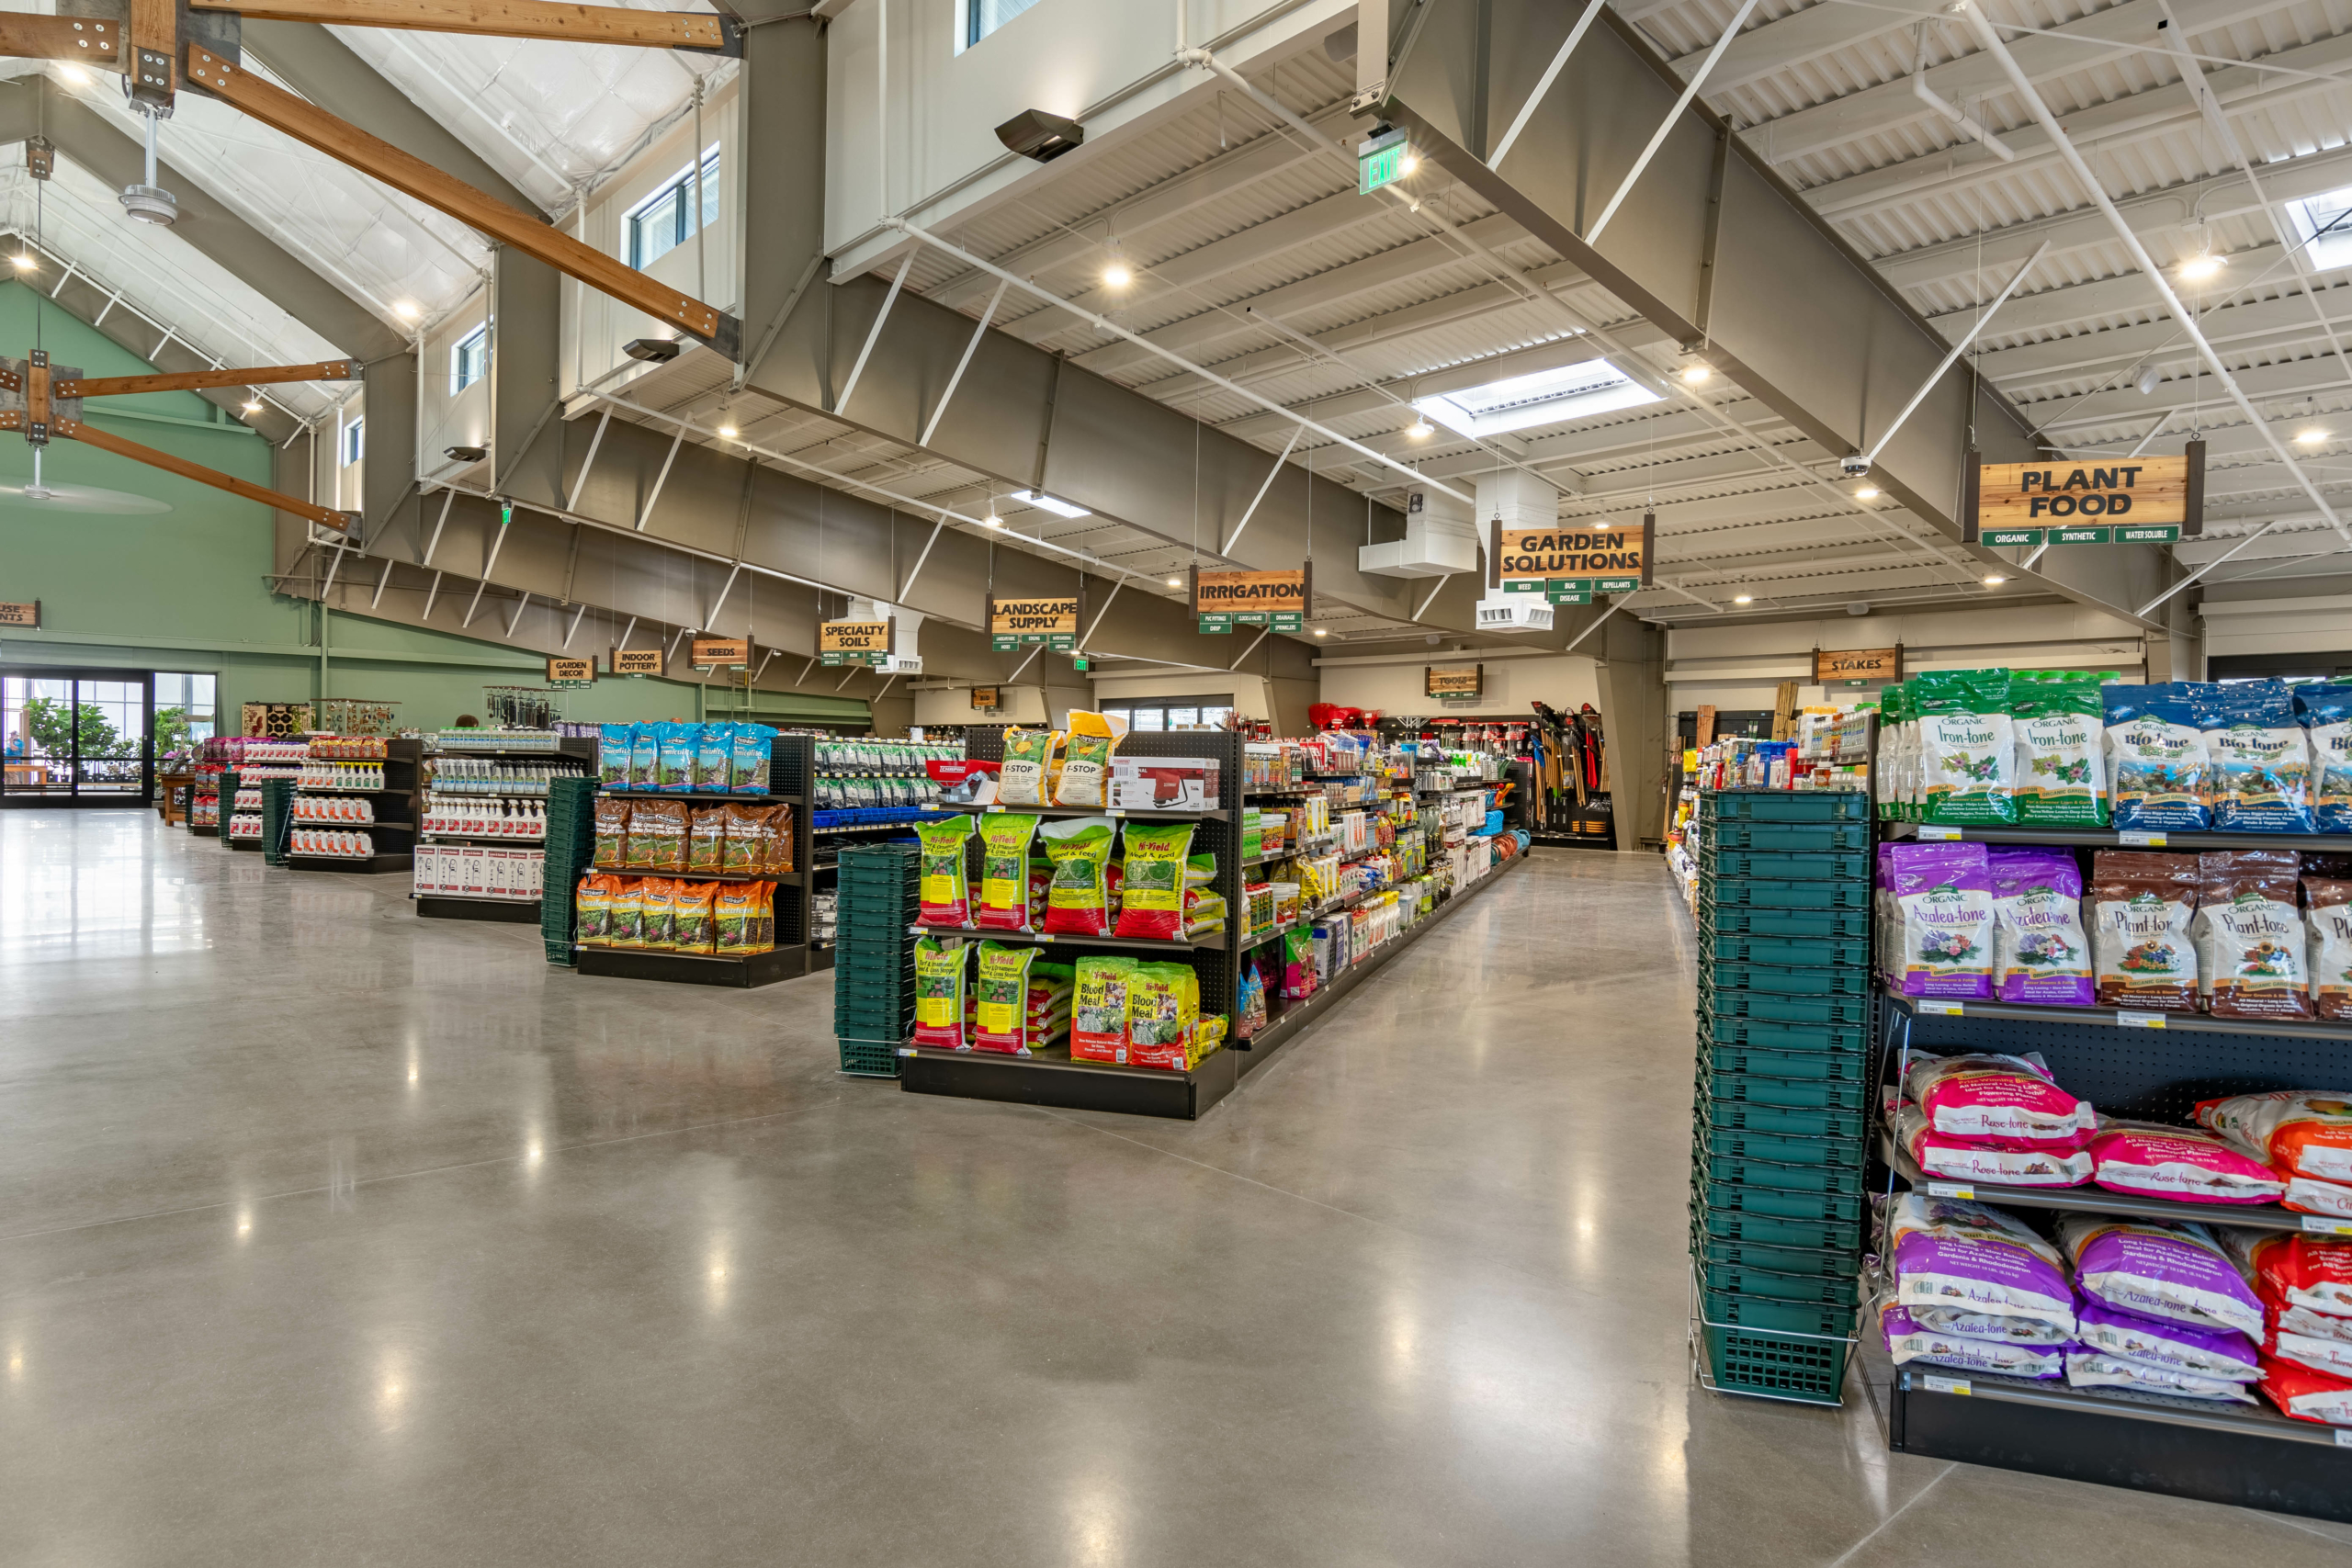 Interior view of a spacious, well-lit store with organized aisles displaying various gardening supplies and pet food, indicating clearly labeled sections like "Plant Food," "Garden Solutions," and "Wild Bird.